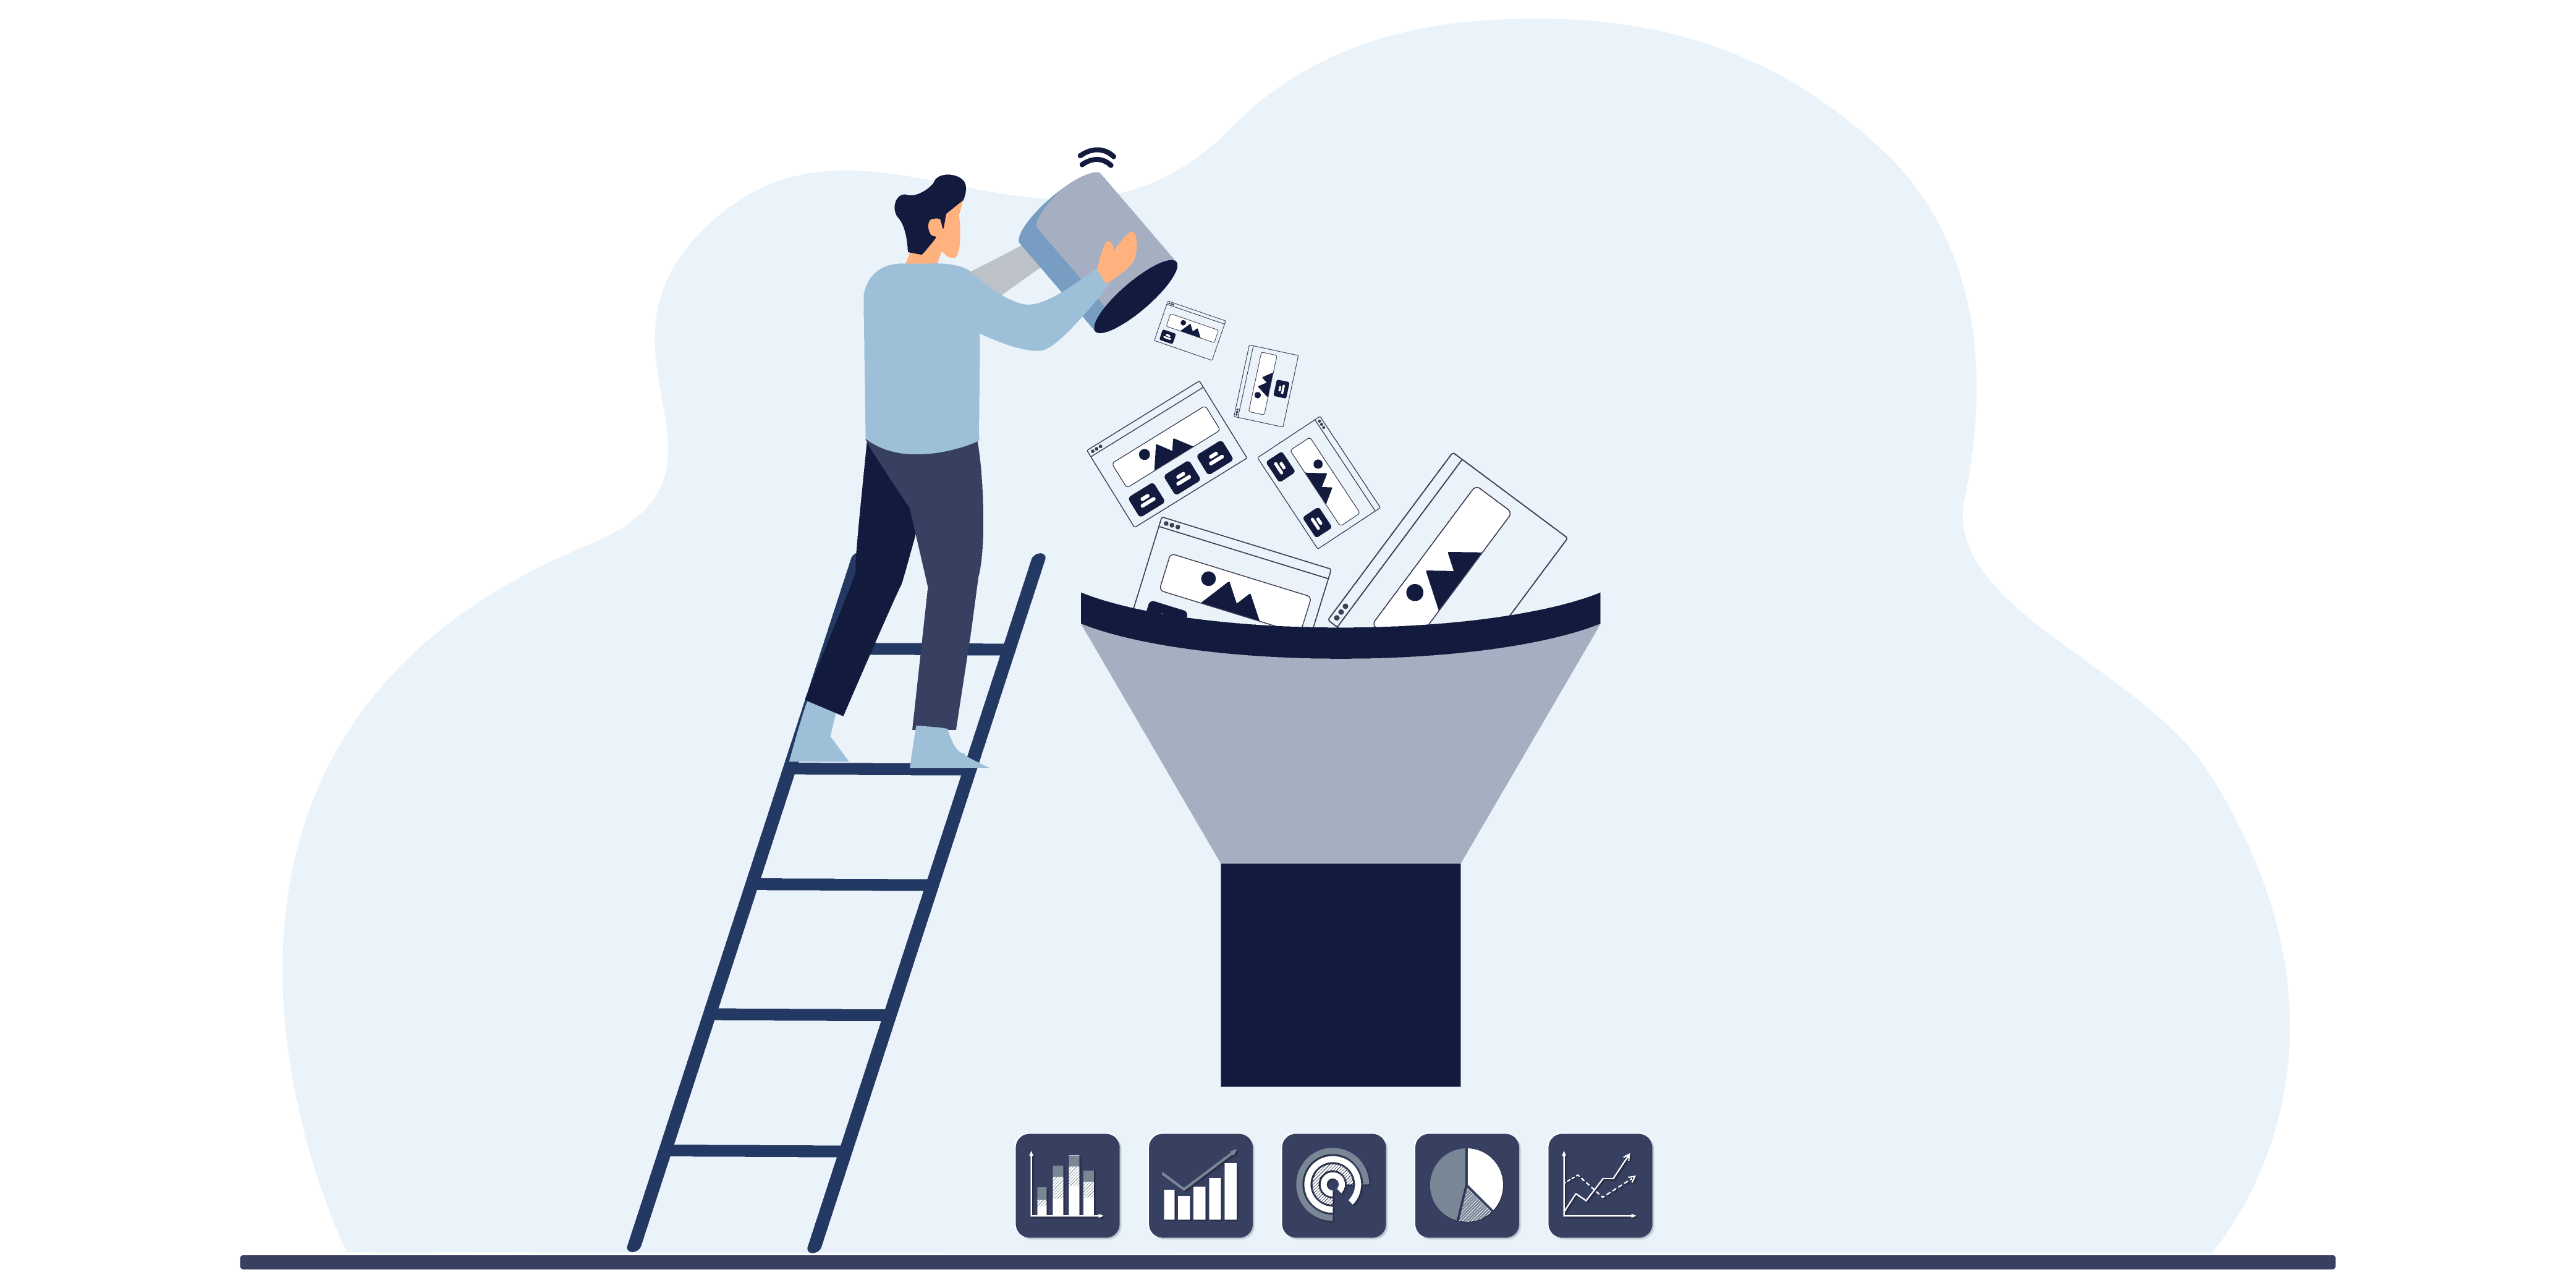 Illustration: A man pouring webpages into a funnel that turns them into data.